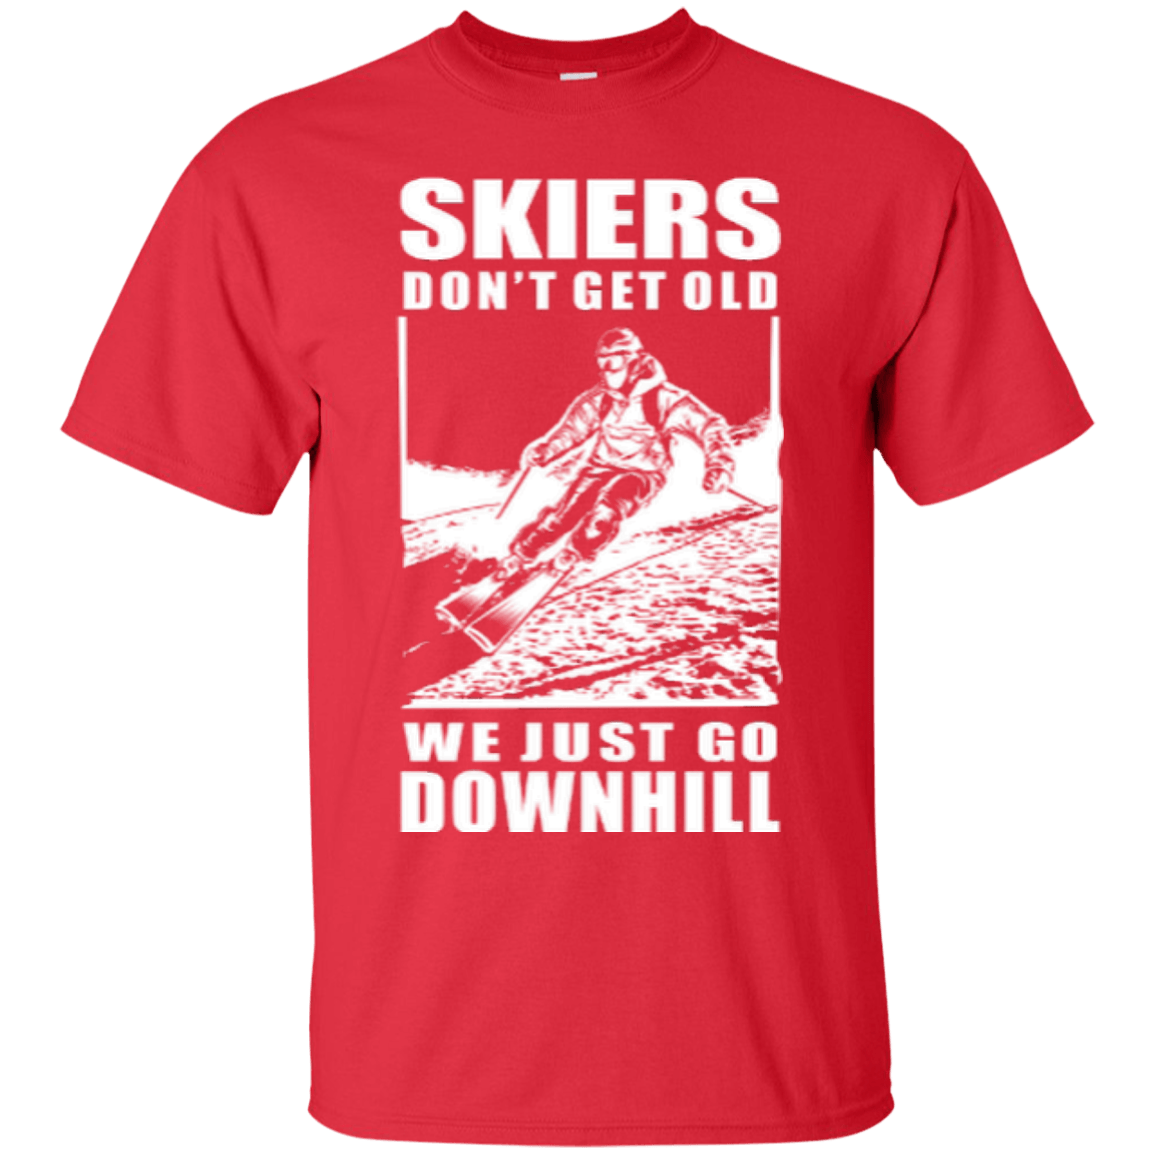 Skiers Dont' Get Old We Just Go Downhill Tees - Powderaddicts